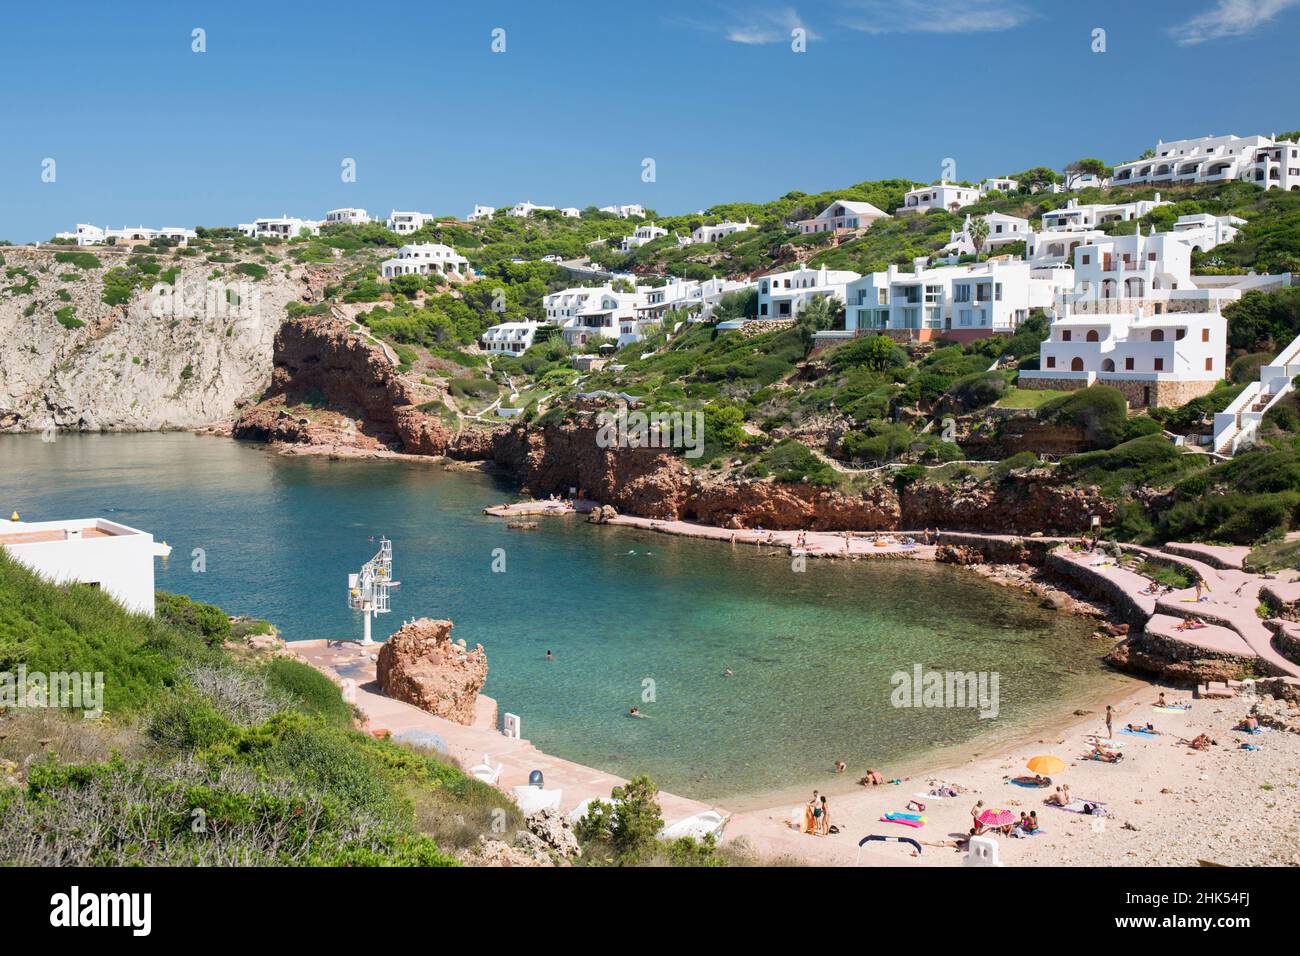 View over sandy beach to residential hillside above bay of clear turquoise water, Cala Morell, Menorca, Balearic Islands, Spain, Mediterranean, Europe Stock Photo